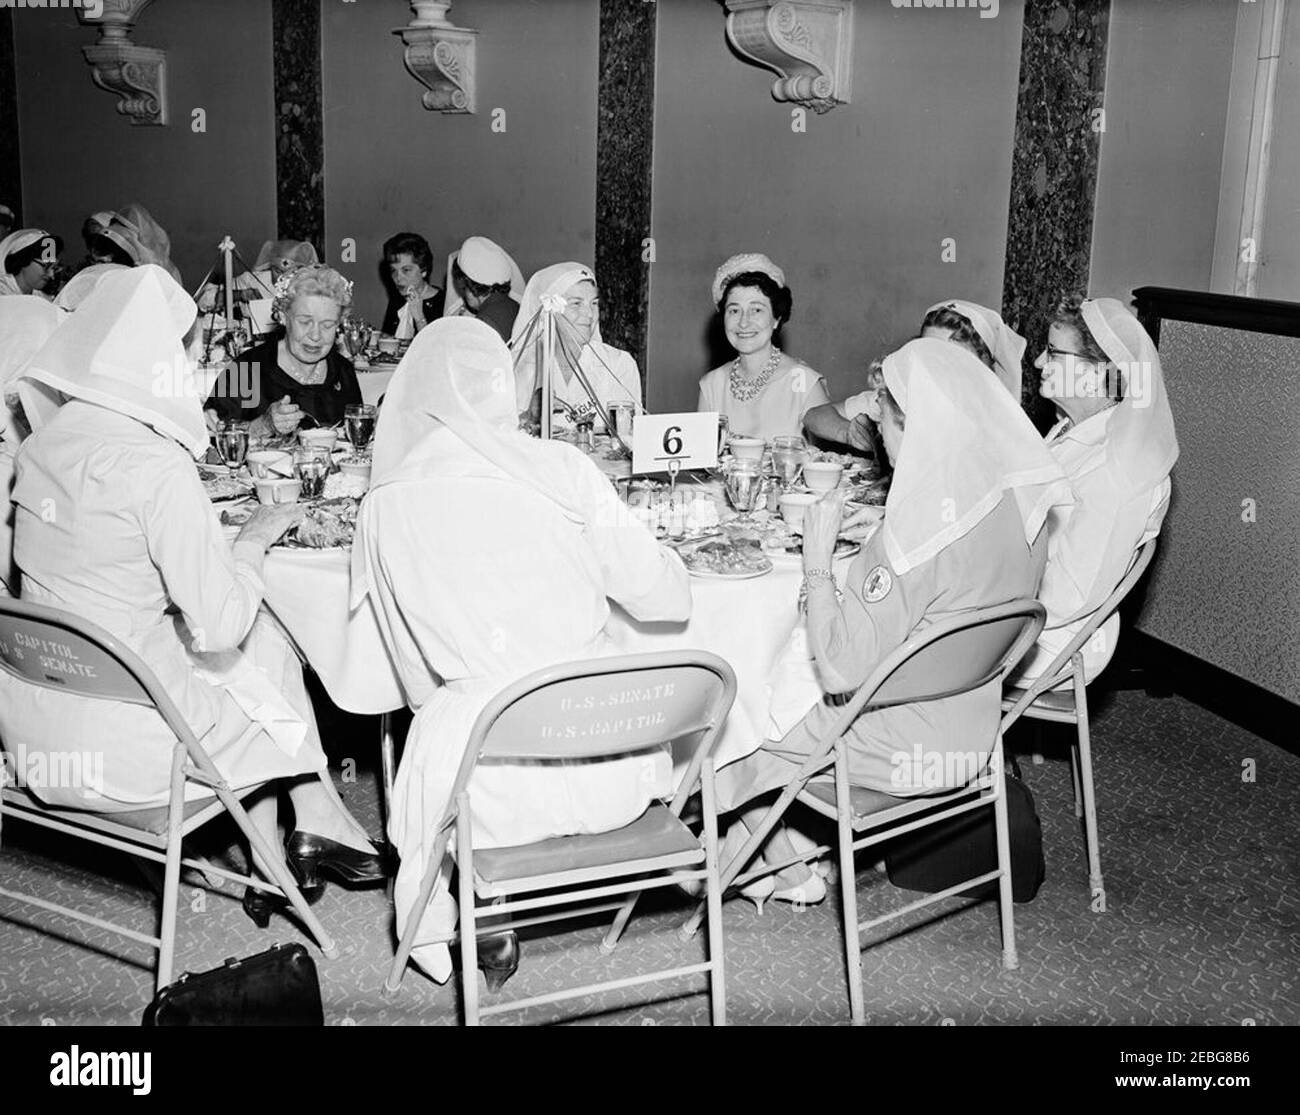 First Lady Jacqueline Kennedy (JBK) attends the Senate Ladiesu0027 Red Cross Unit Luncheon. Members of the Senate Ladies Red Cross Unit sit at a table during a luncheon (attended by First Lady Jacqueline Kennedy) in the Old Supreme Court Chamber, United States Capitol Building, Washington, D.C. The Red Cross unit (also known as u201cLadies of the Senateu201d) is comprised of the wives of members of the US Senate. Seated at center left is Emily Douglas, former Representative from Illinois and wife of Senator Paul H. Douglas (Illinois); all others are unidentified. Stock Photo